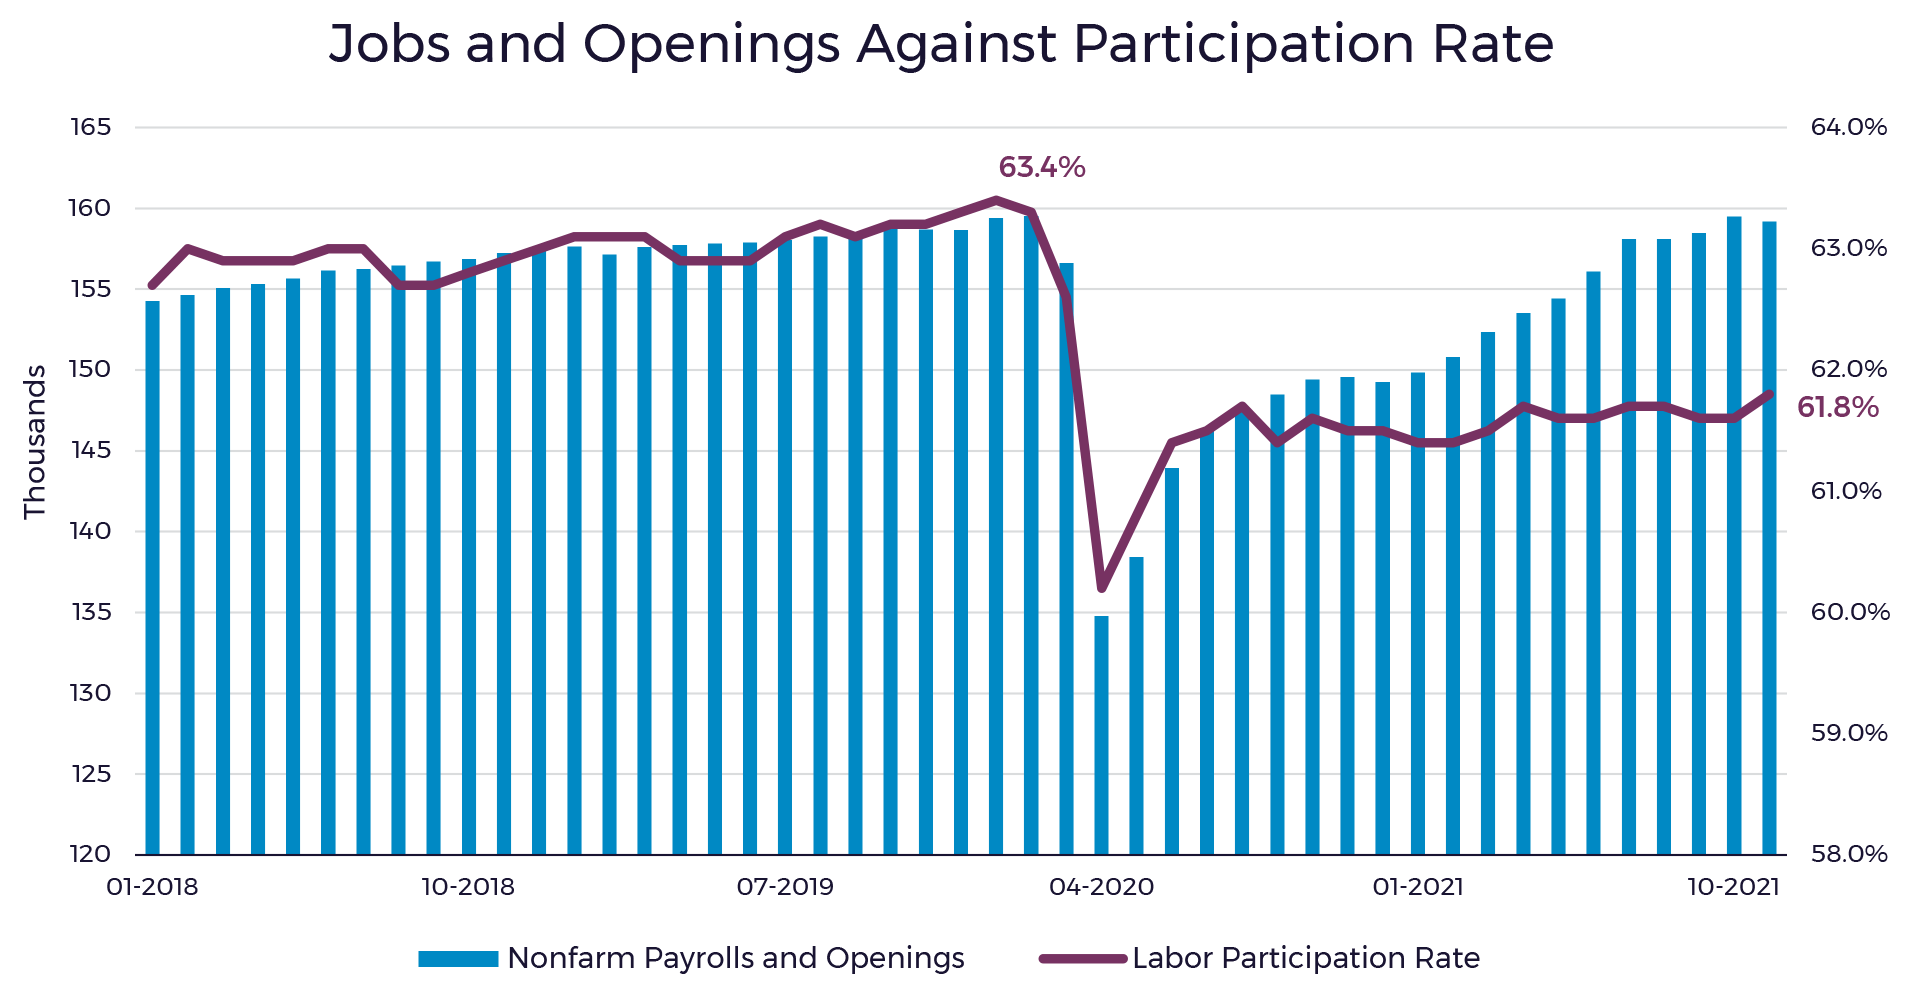 Jobs and Openings Against Participation Rate Chart 2018 to 2021